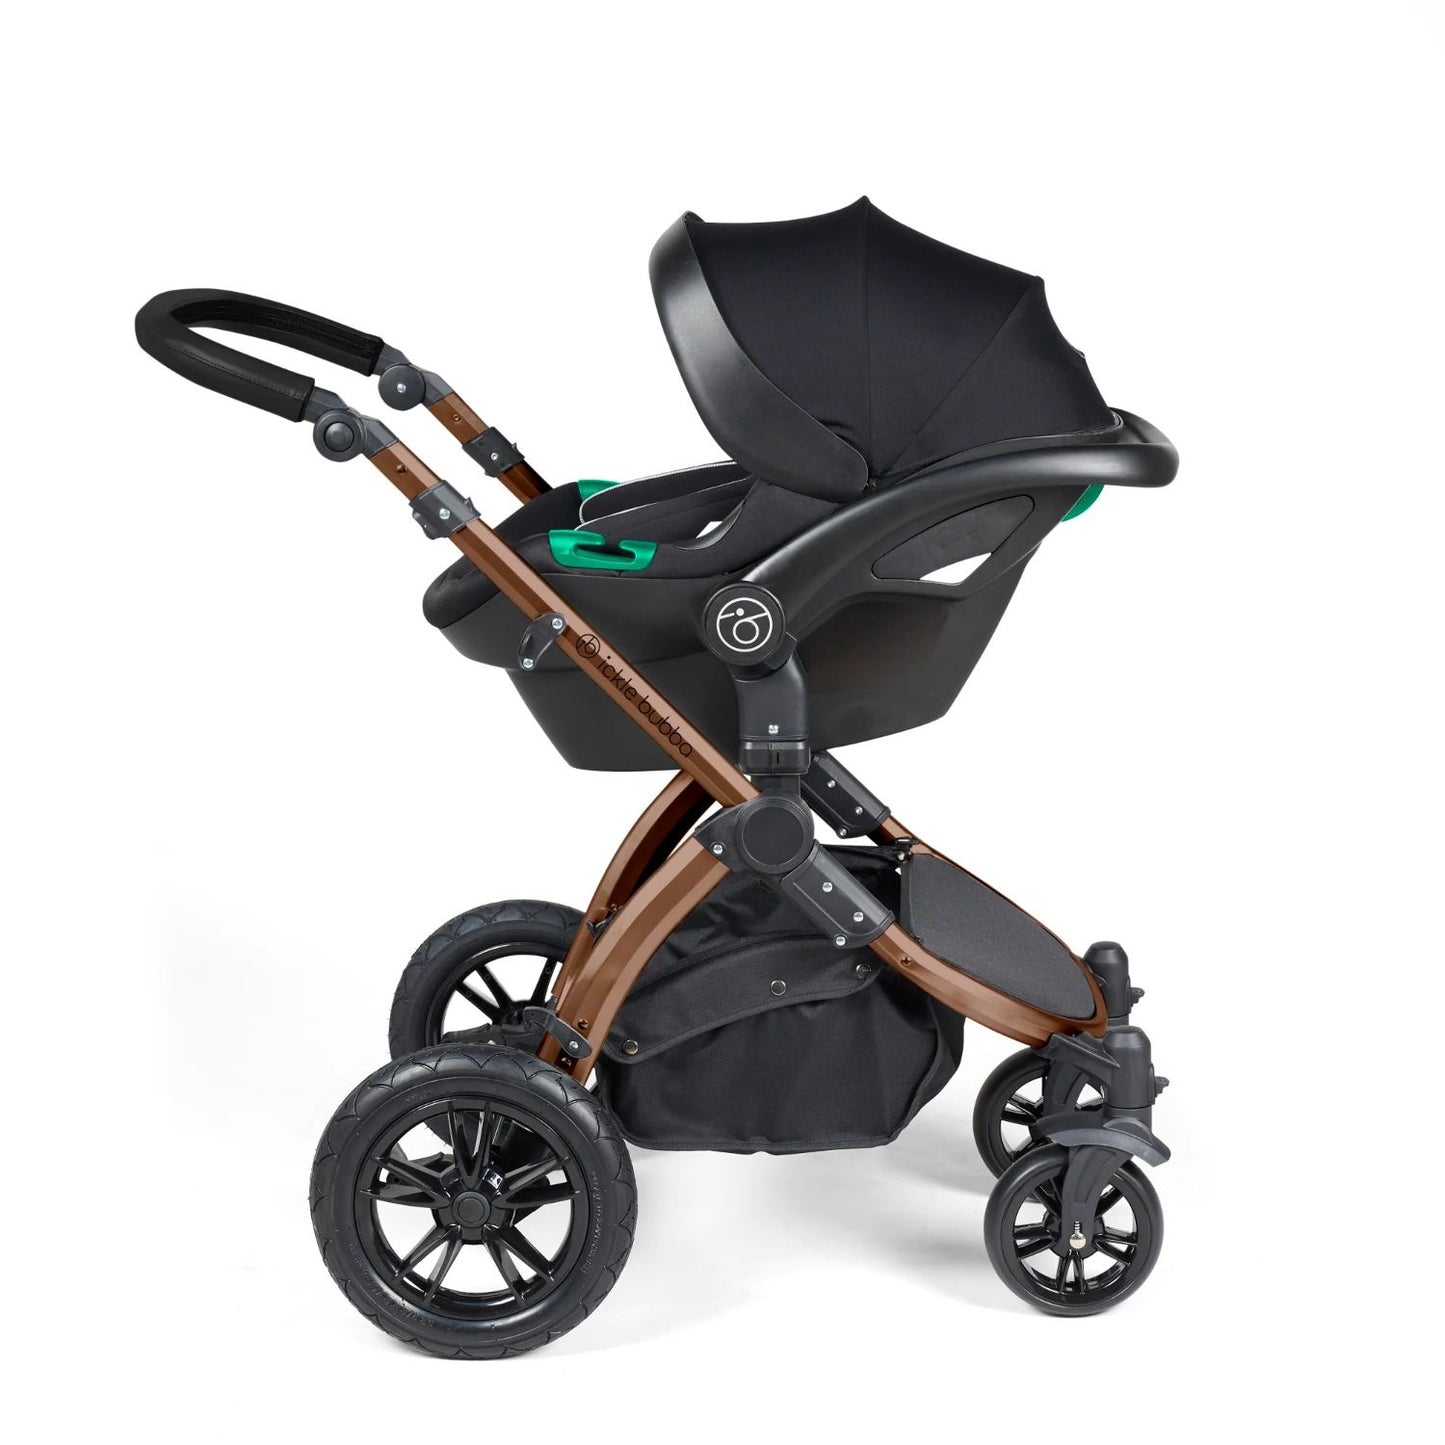 Ickle Bubba Stomp Luxe Pushchair with Stratus i-Size car seat attached in Woodland green colour with bronze chassis